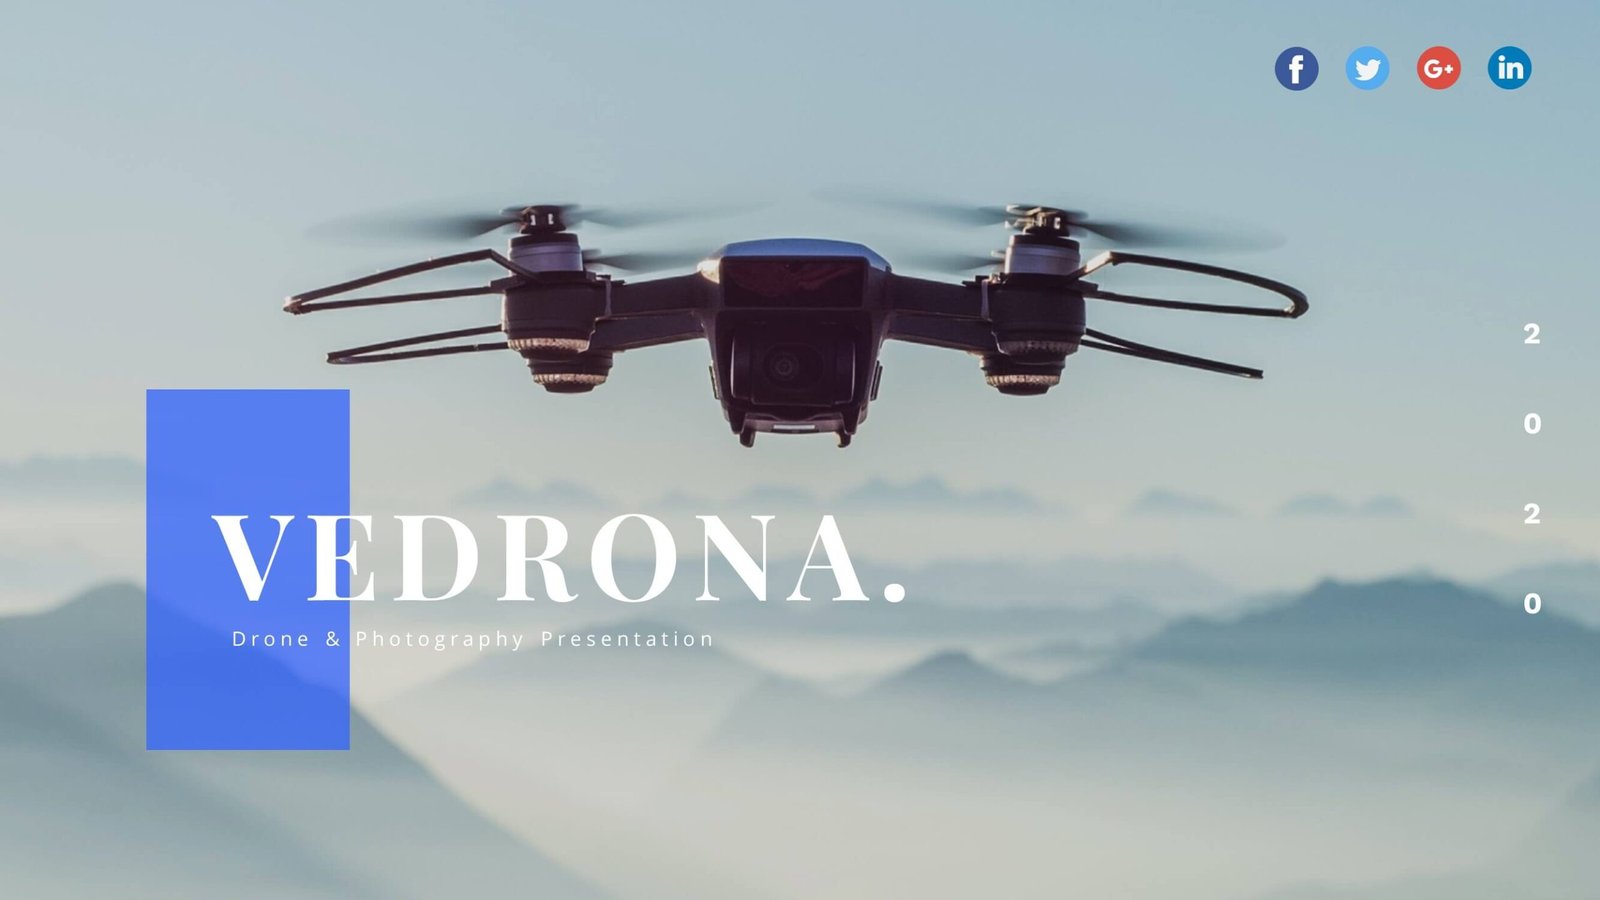 Verdrona - Drone & Photography Keynote Template